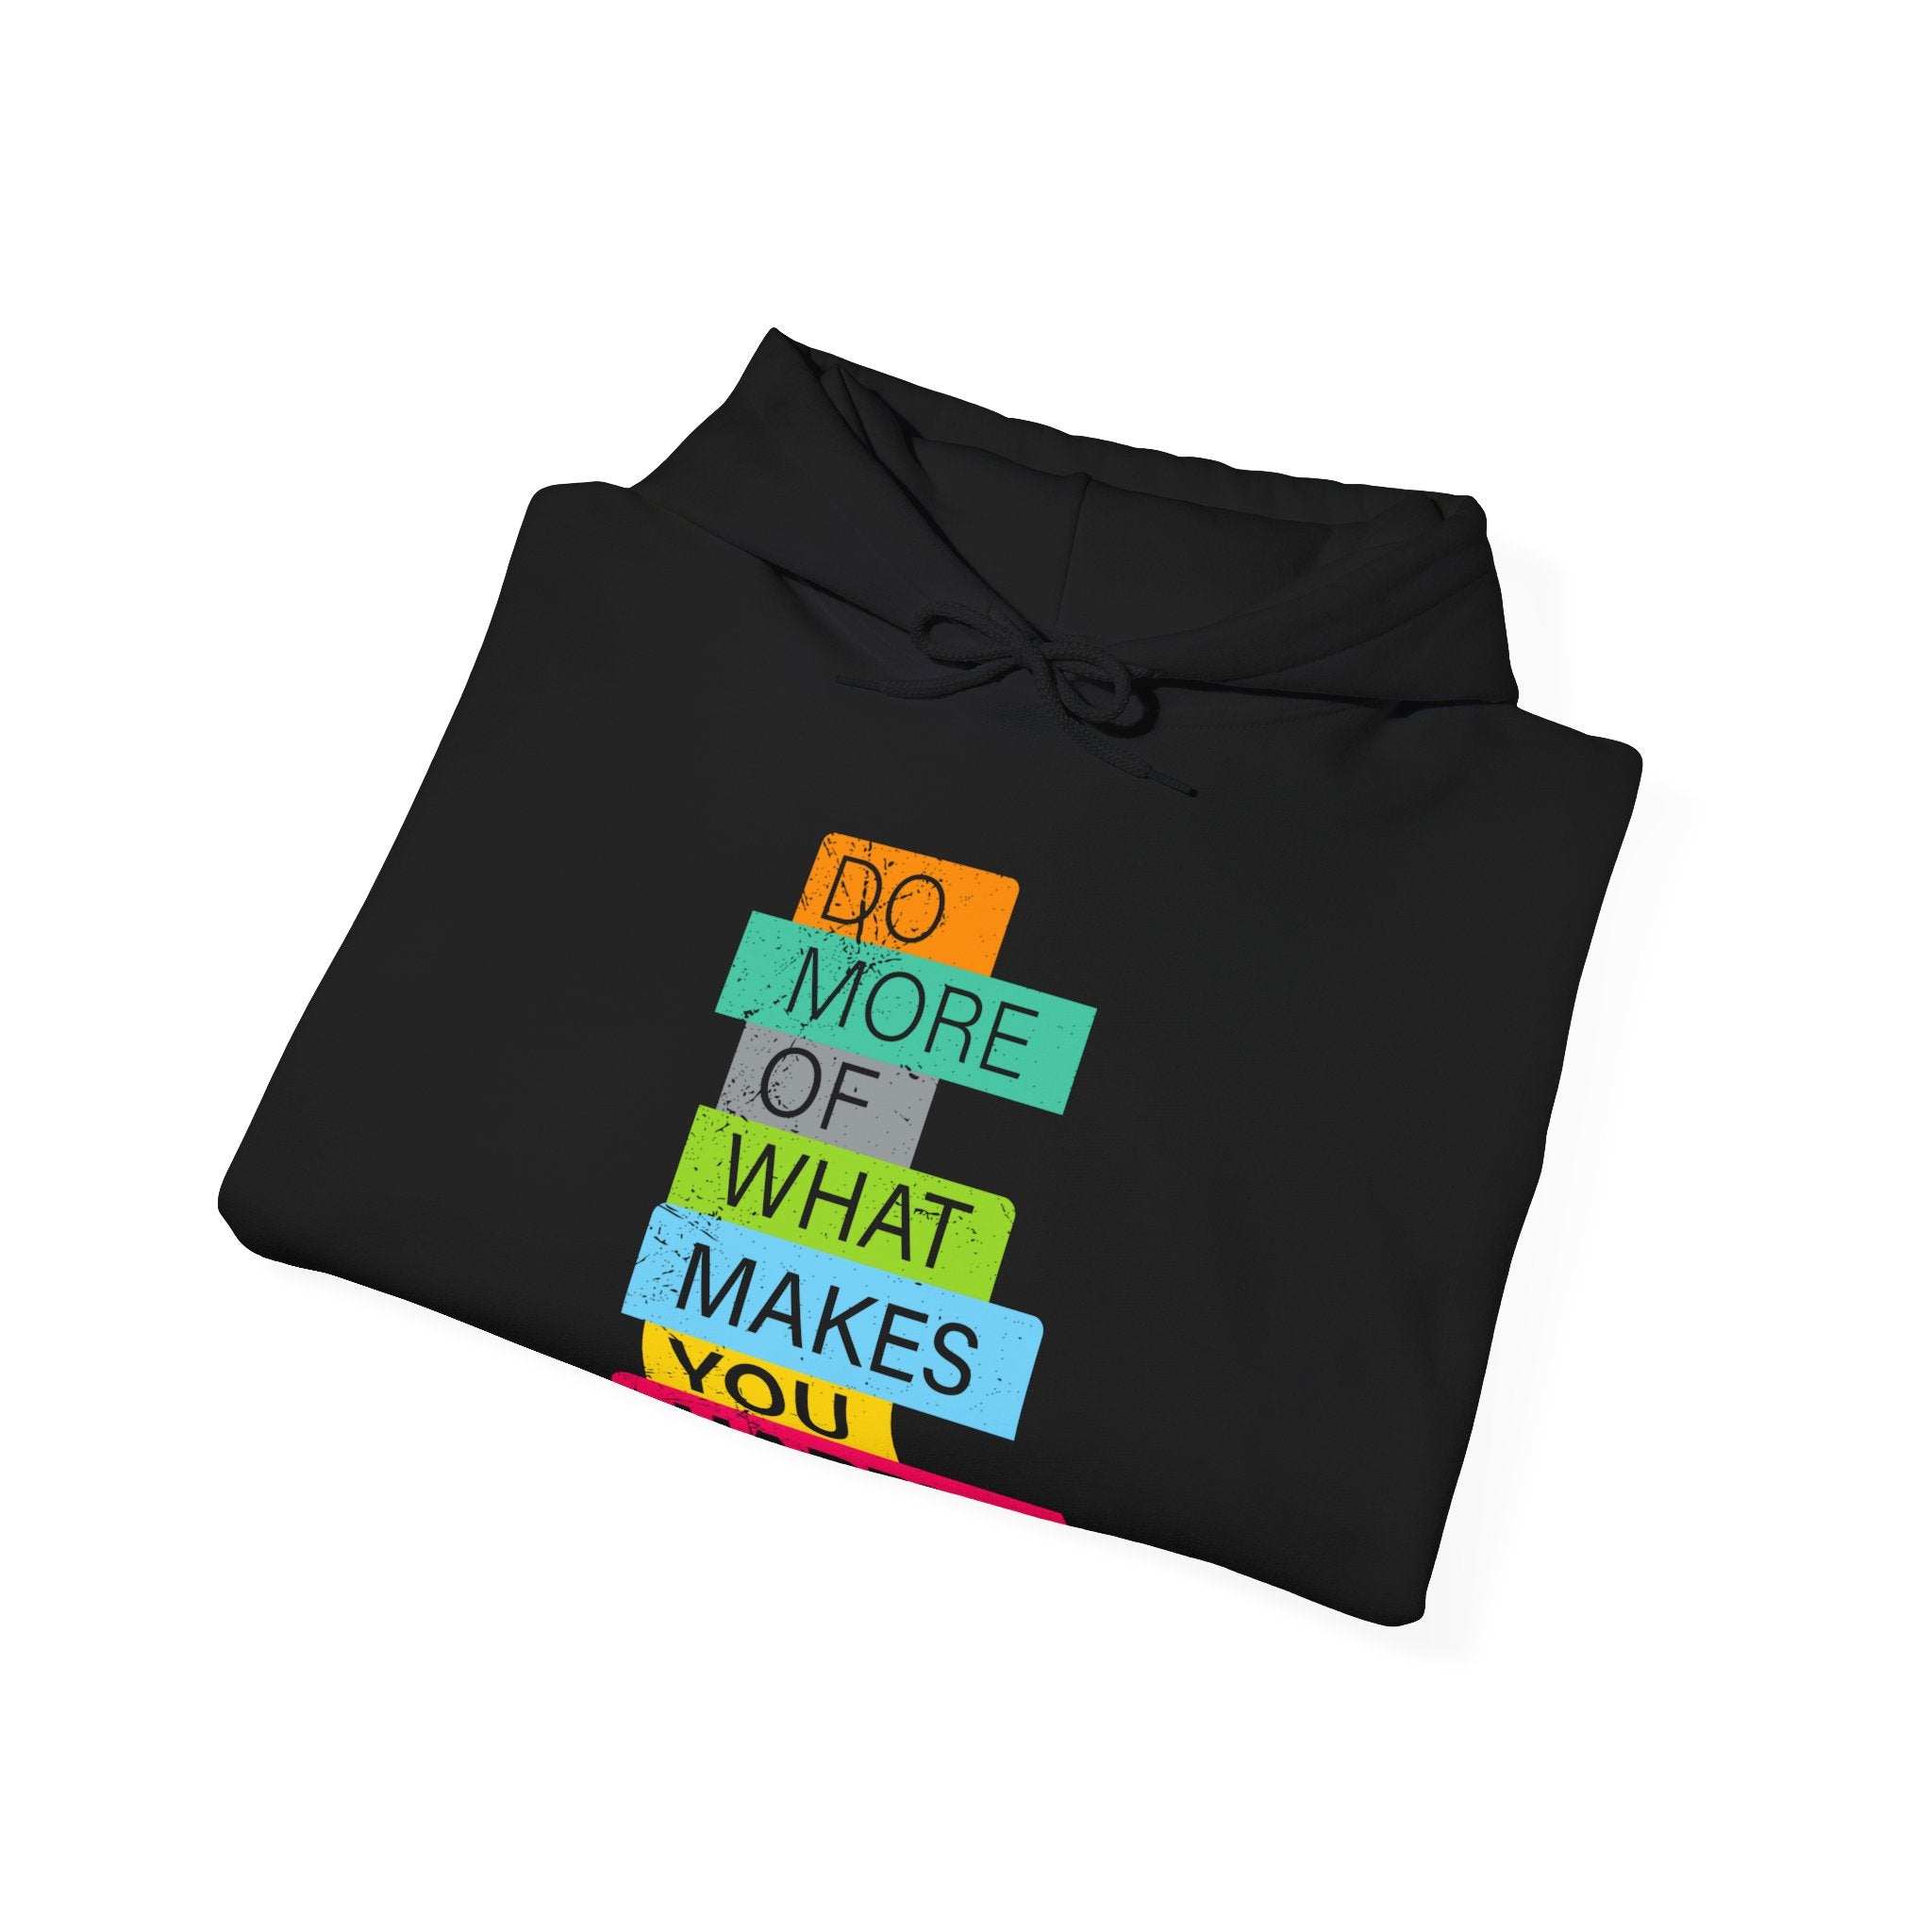 Do More of What Makes You Happy - Hooded Sweatshirt